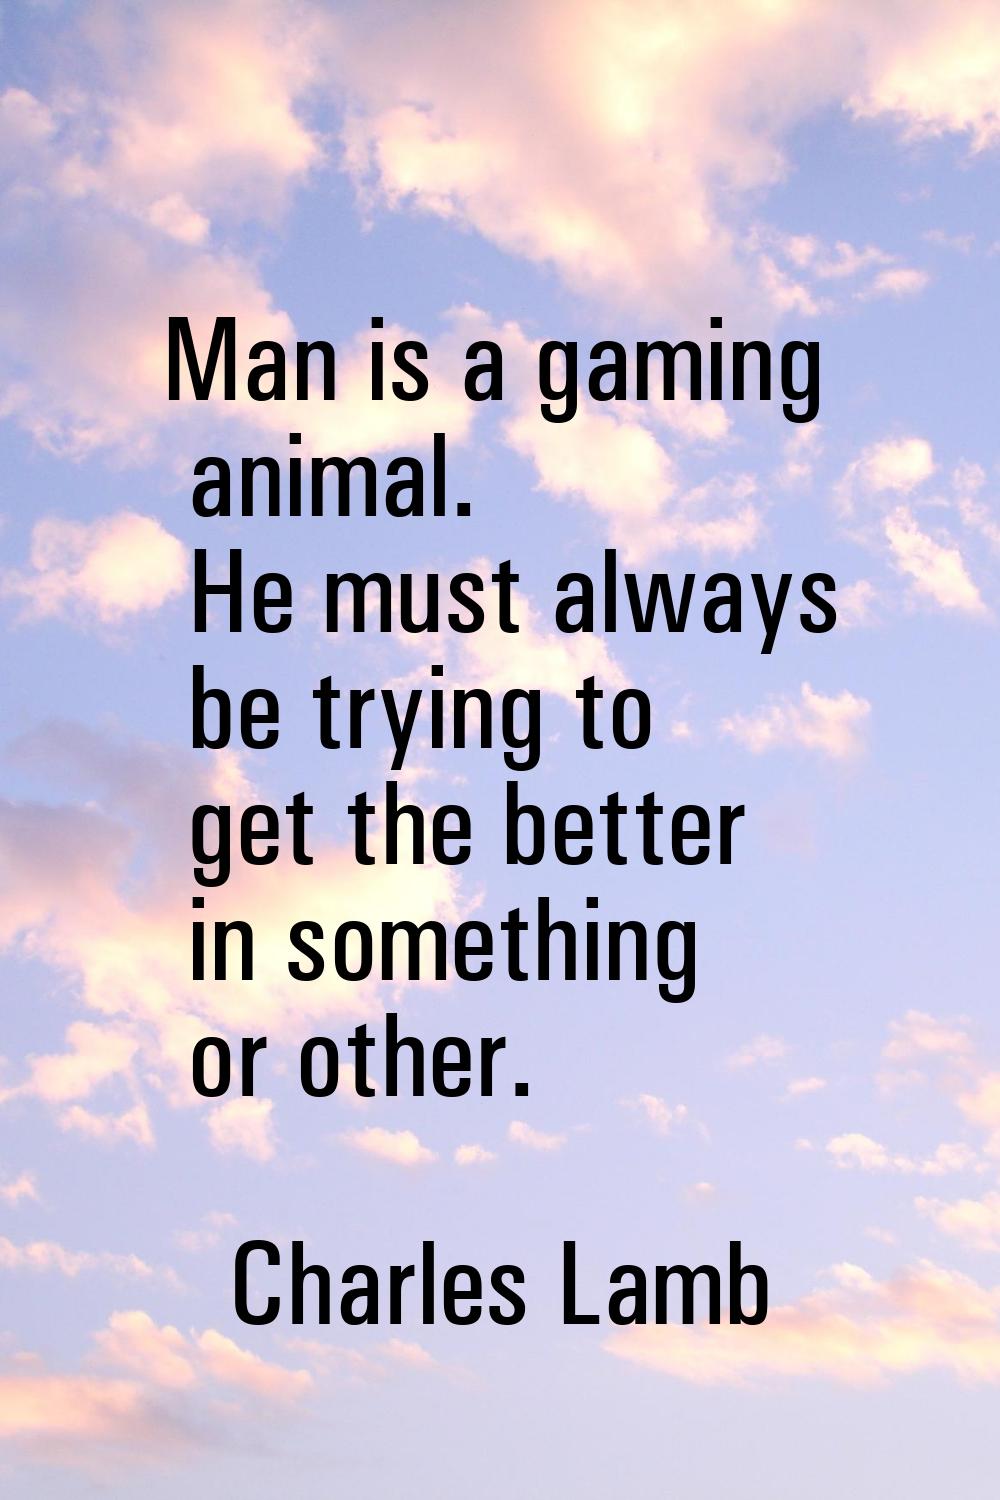 Man is a gaming animal. He must always be trying to get the better in something or other.